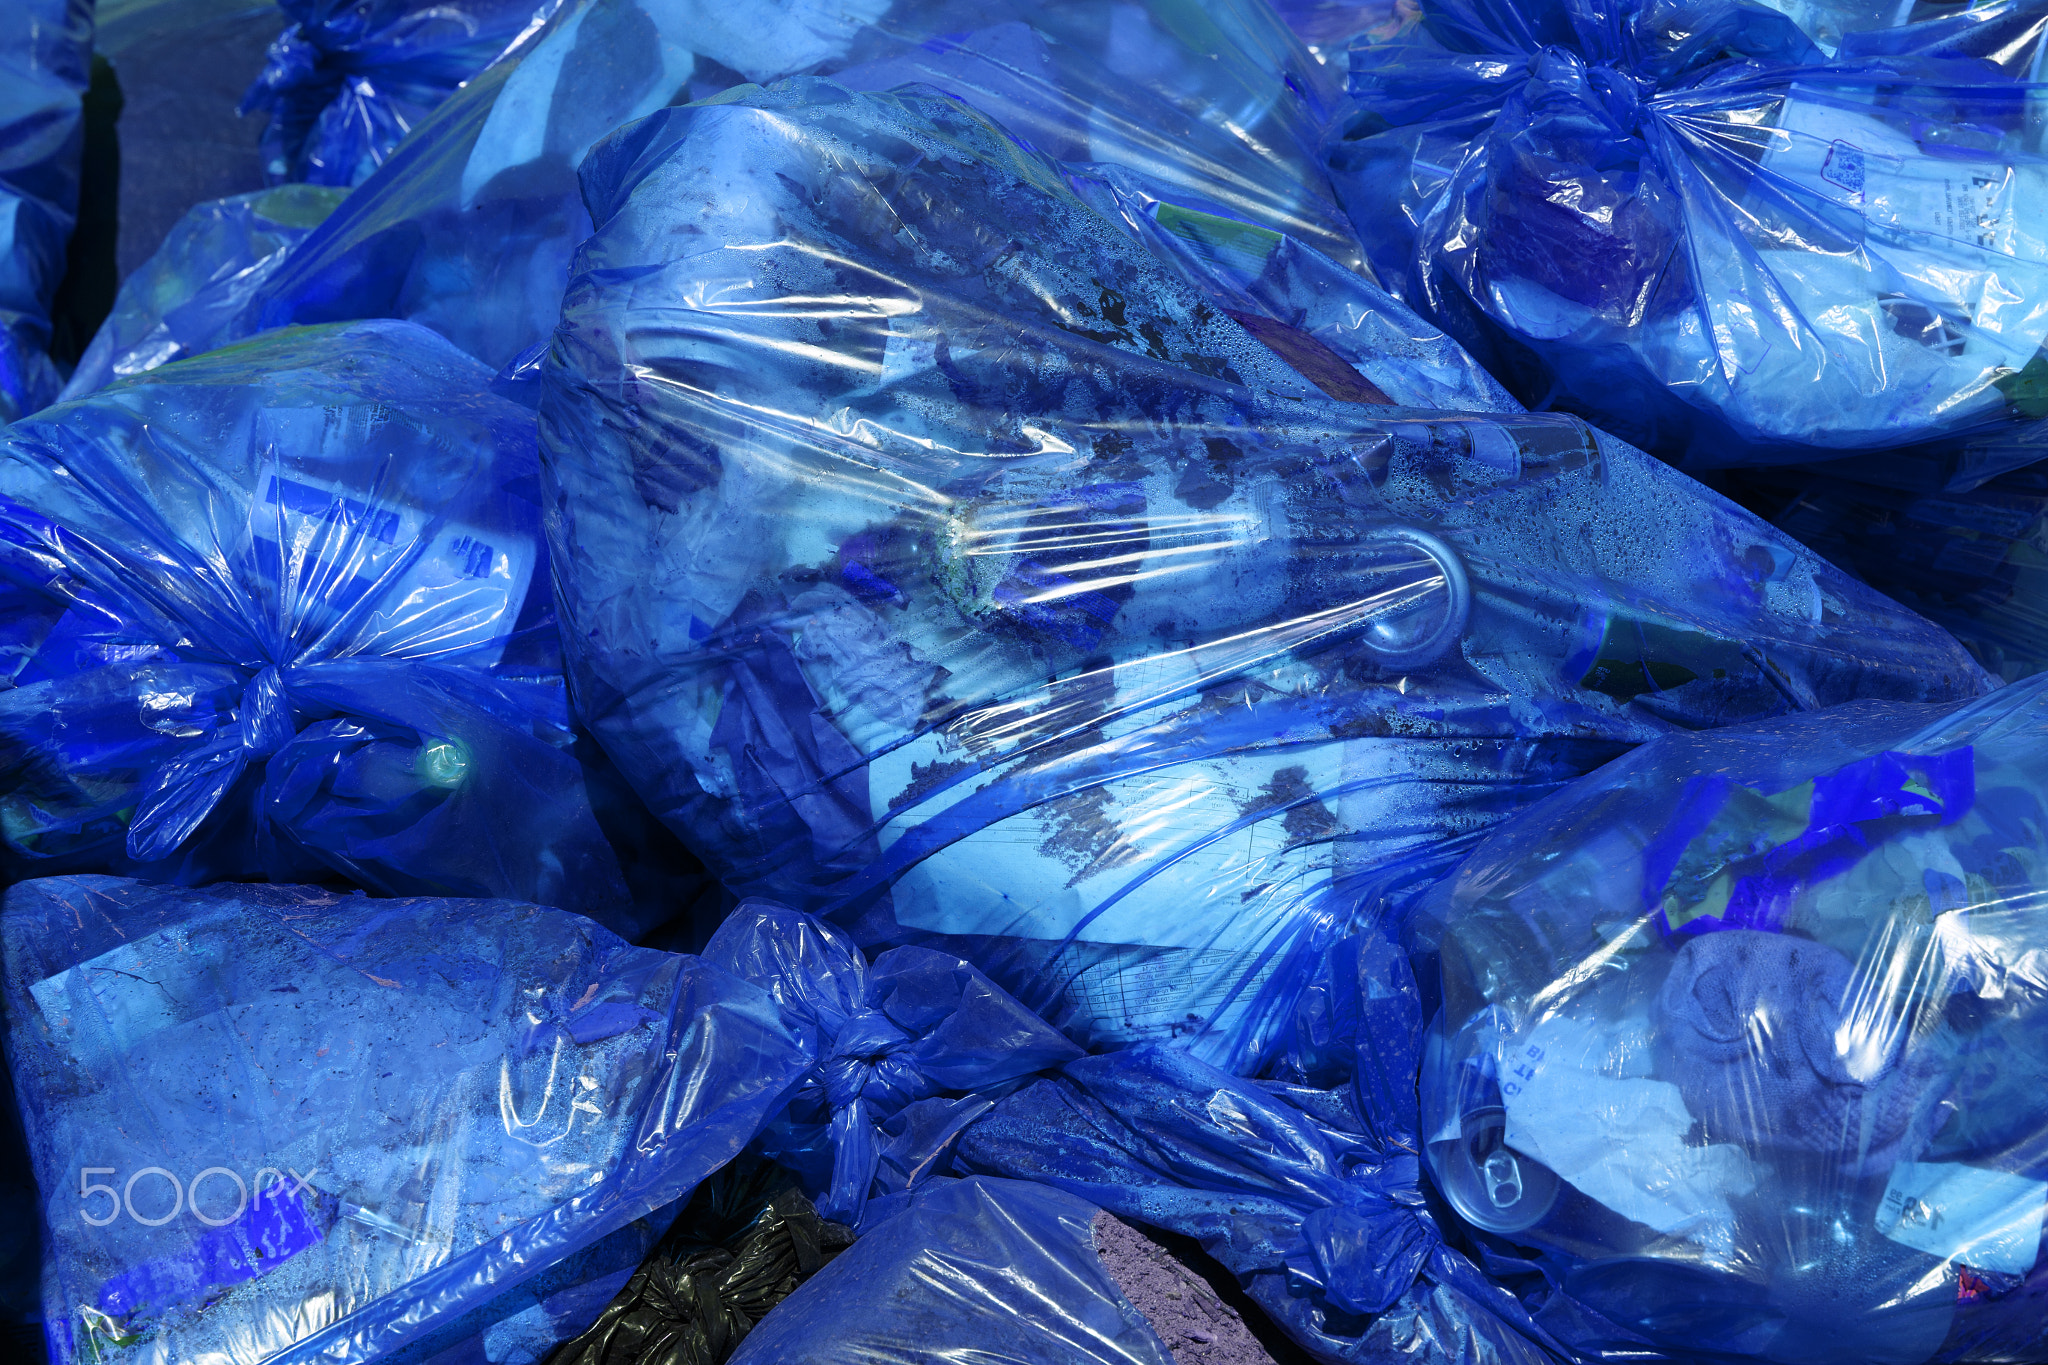 full frame background of blue plastic trash bags with generic domestic